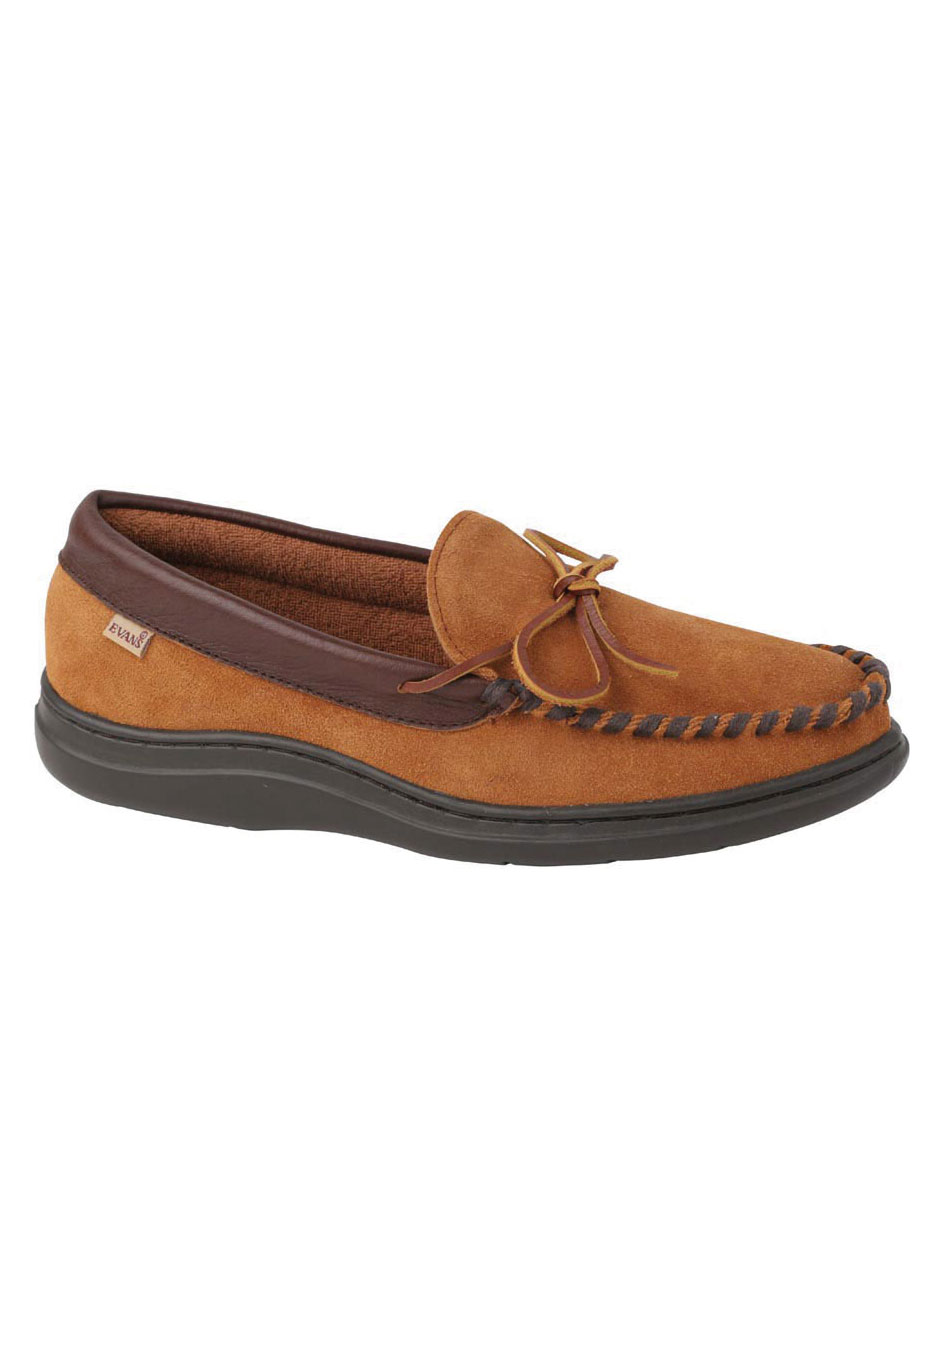 L.B. Evans Atlin Terry Lined Moccasin Slippers, 